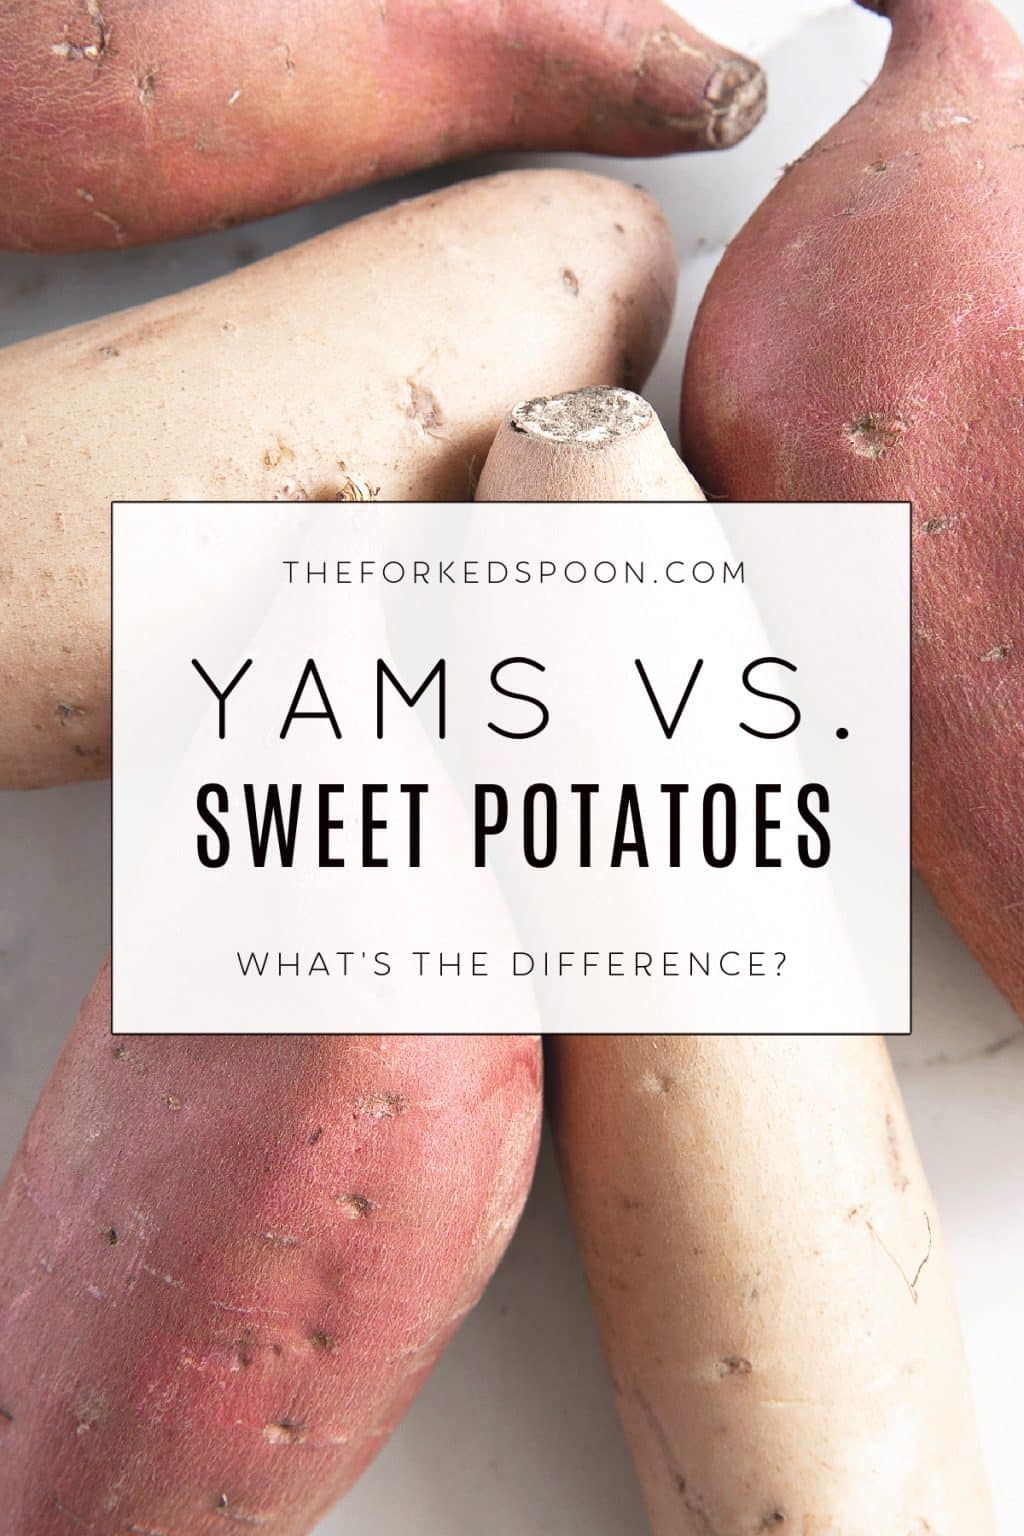 Yams Vs Sweet Potatoes  Whats The Difference  Image With Text Overlay 1024x1536 